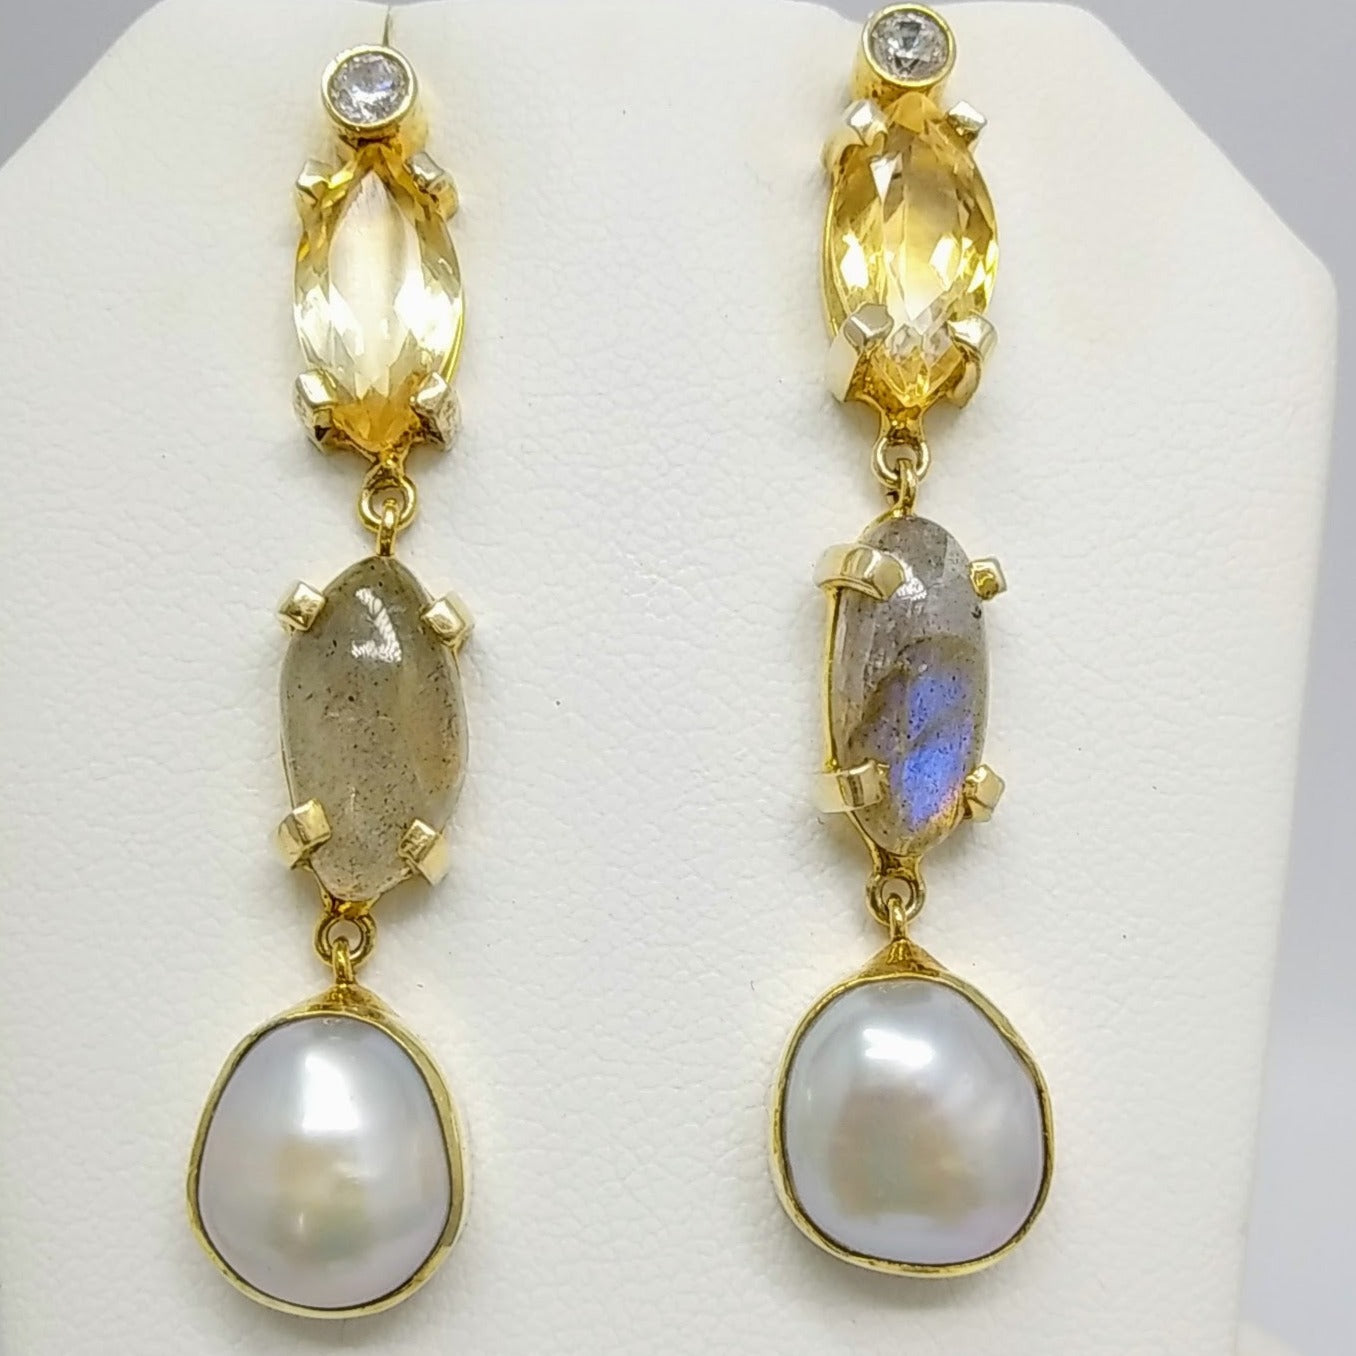 "Gold Stars Over a Silver Moon" -Citrine Labradorite and Pearl Post Dangle Earrings